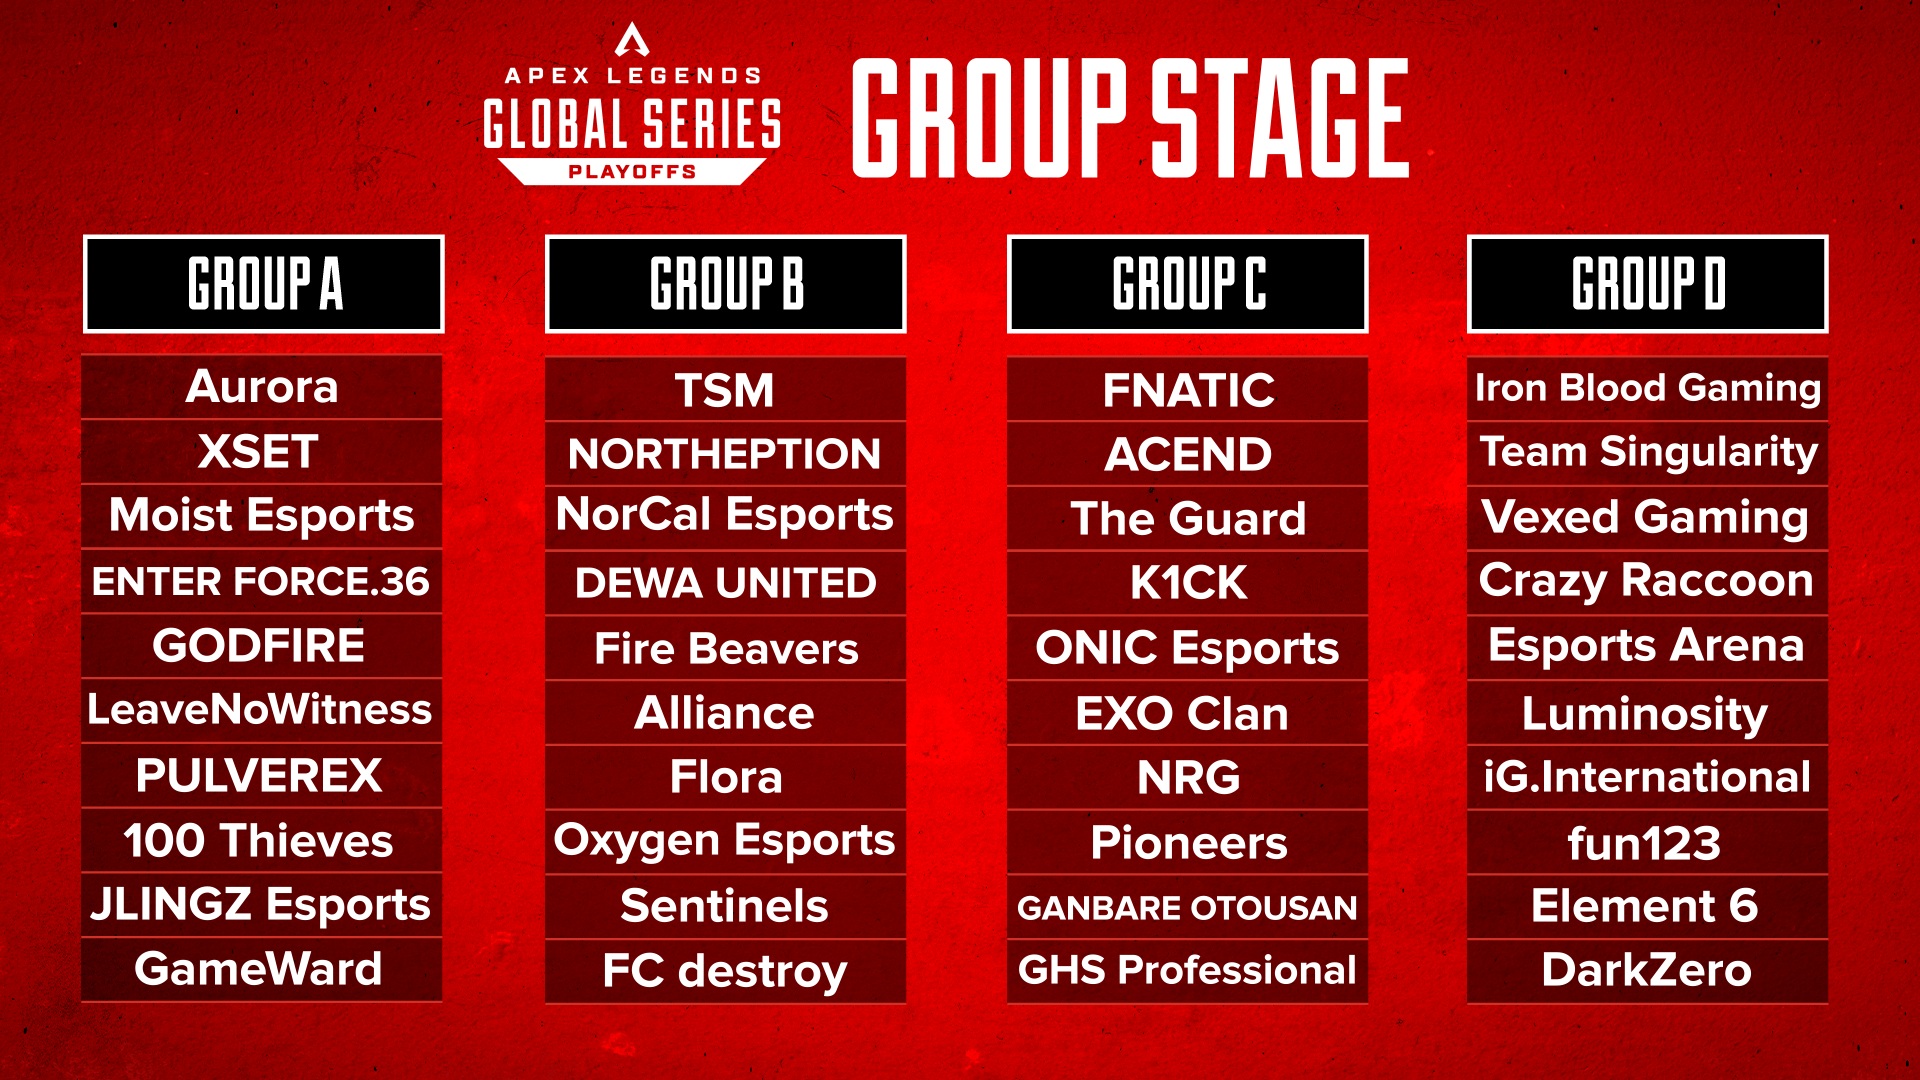 ALGS Twitch Drops: a graphic showing the groups for the ALGS Split 1 Playoffs